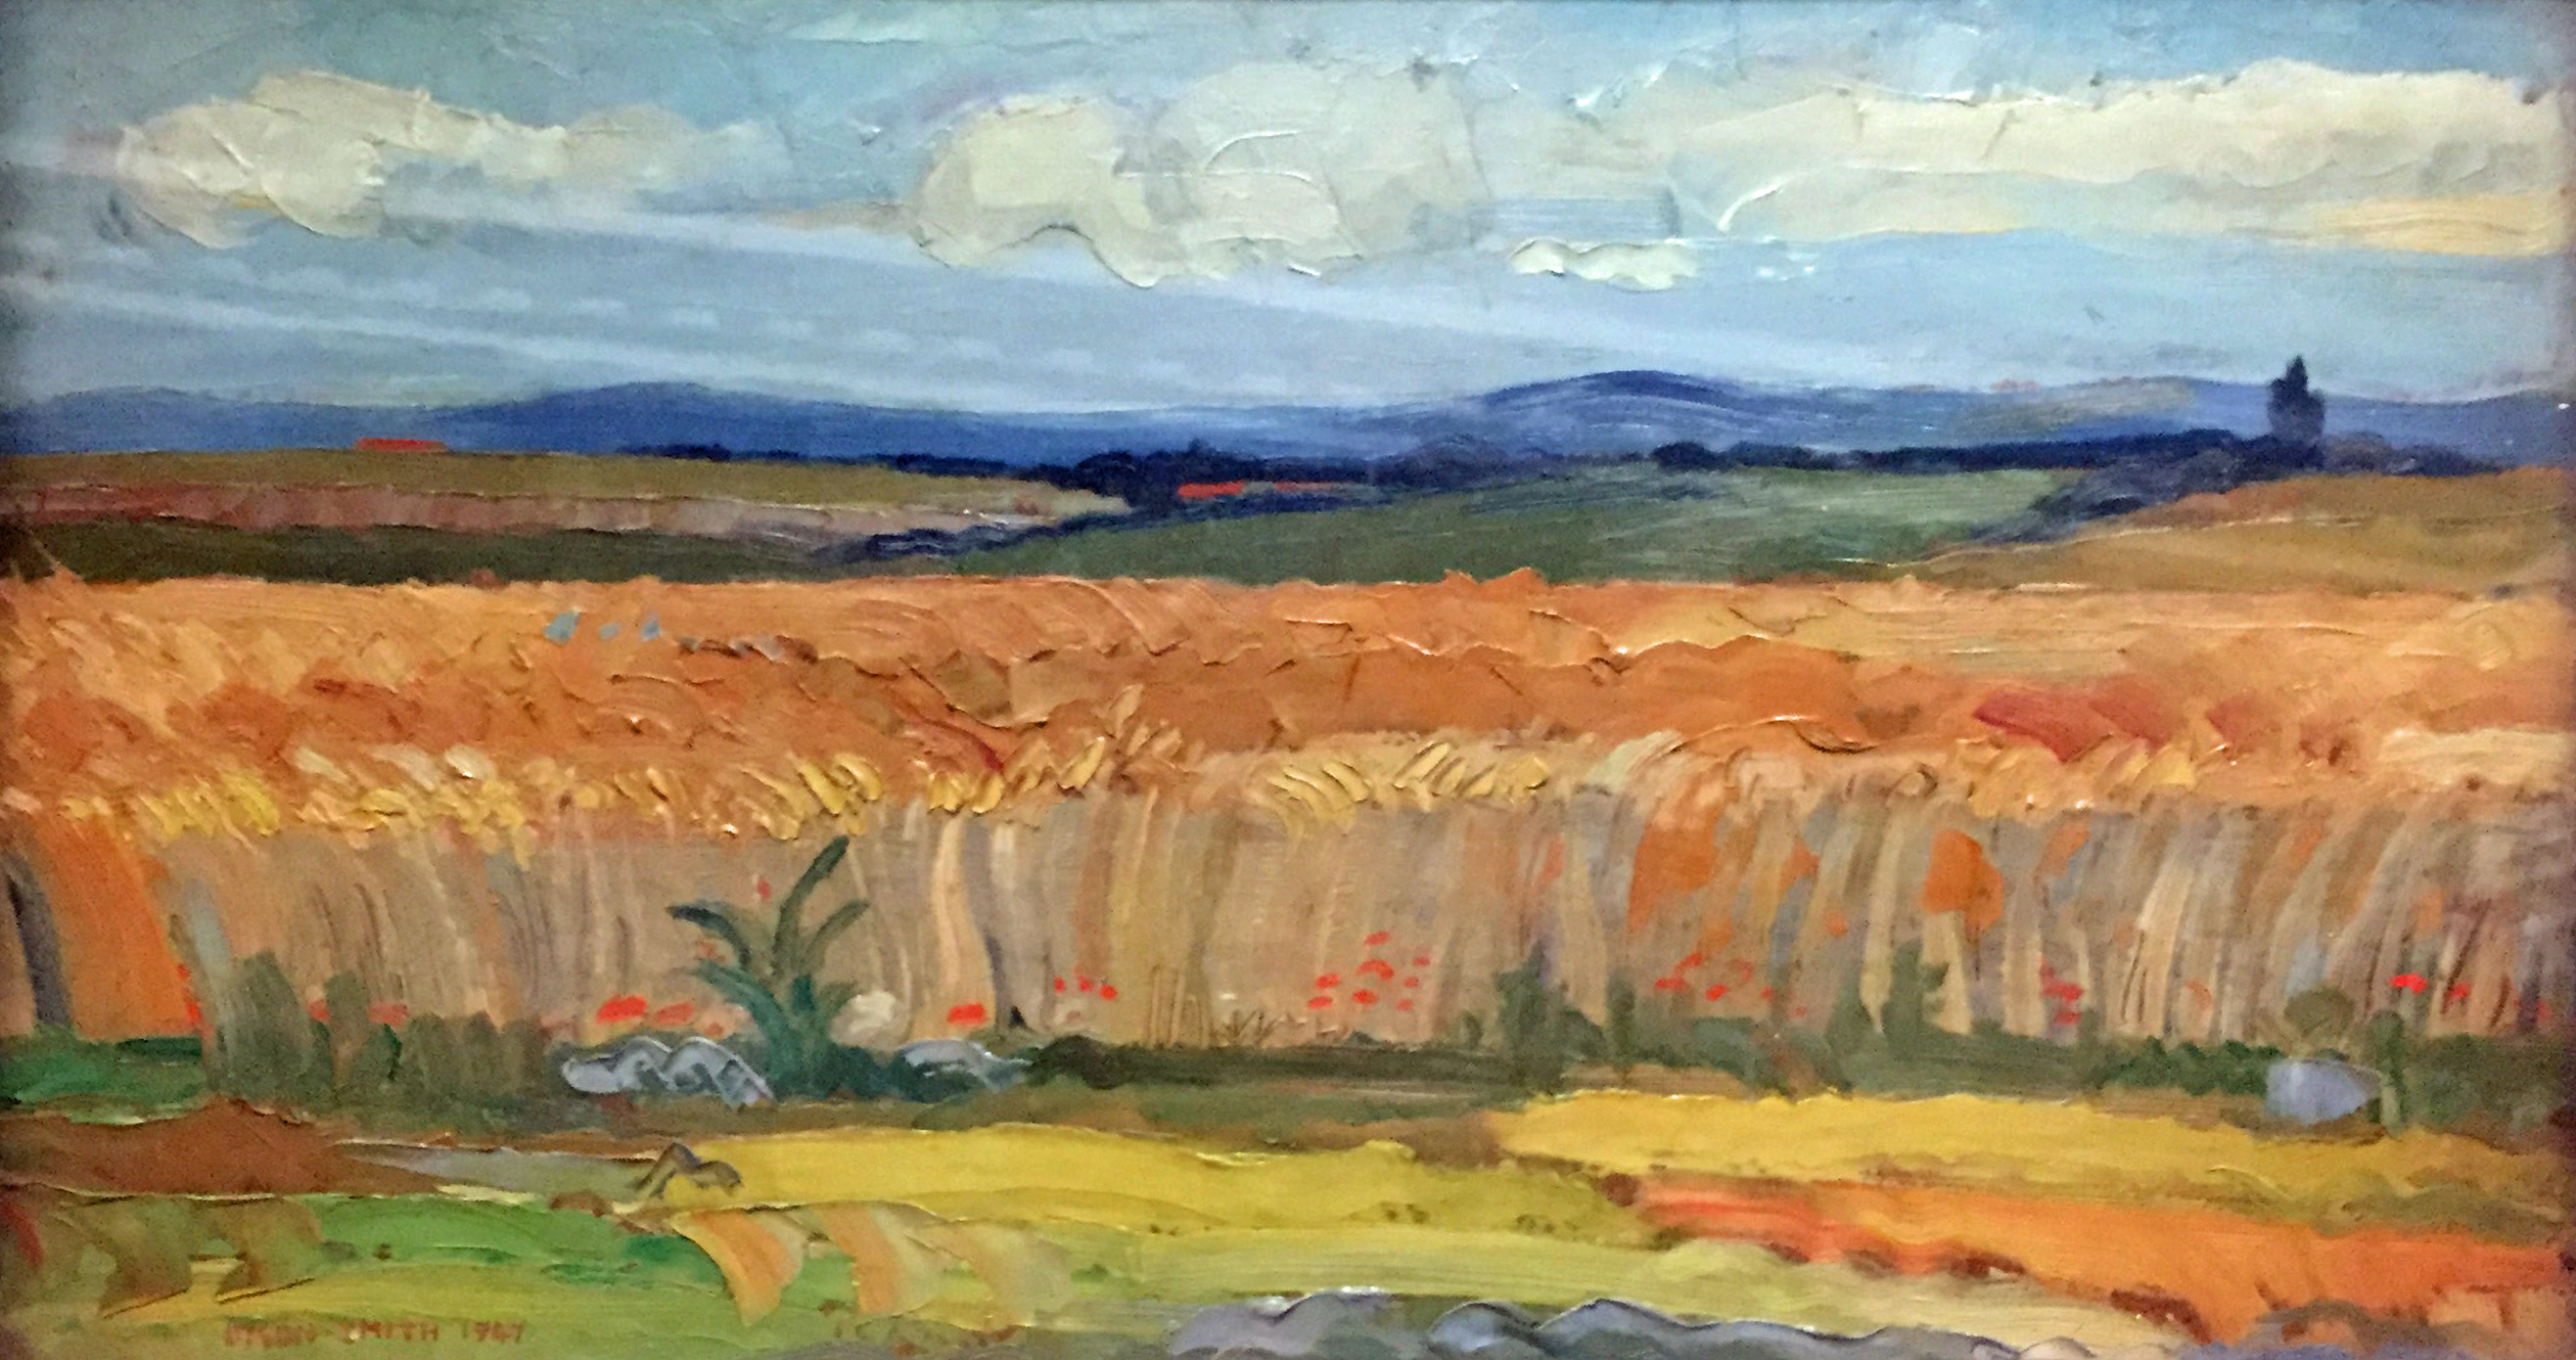 DYSON SMITH, 1947, OIL ON BOARD View of a Cornfield, cream framed.